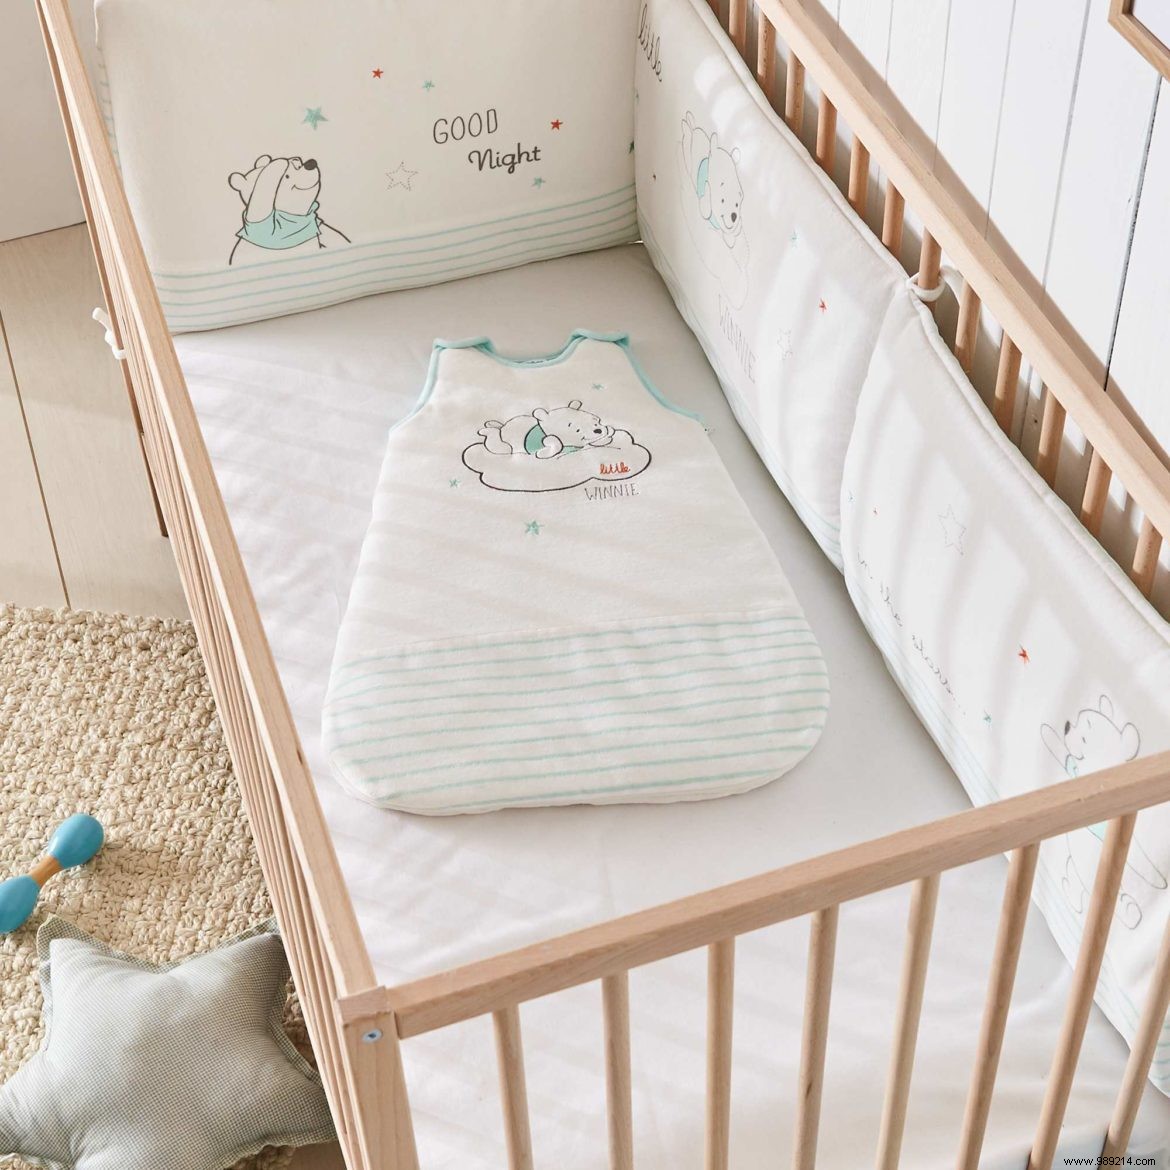 Baby sleeping bag:what is it for? 